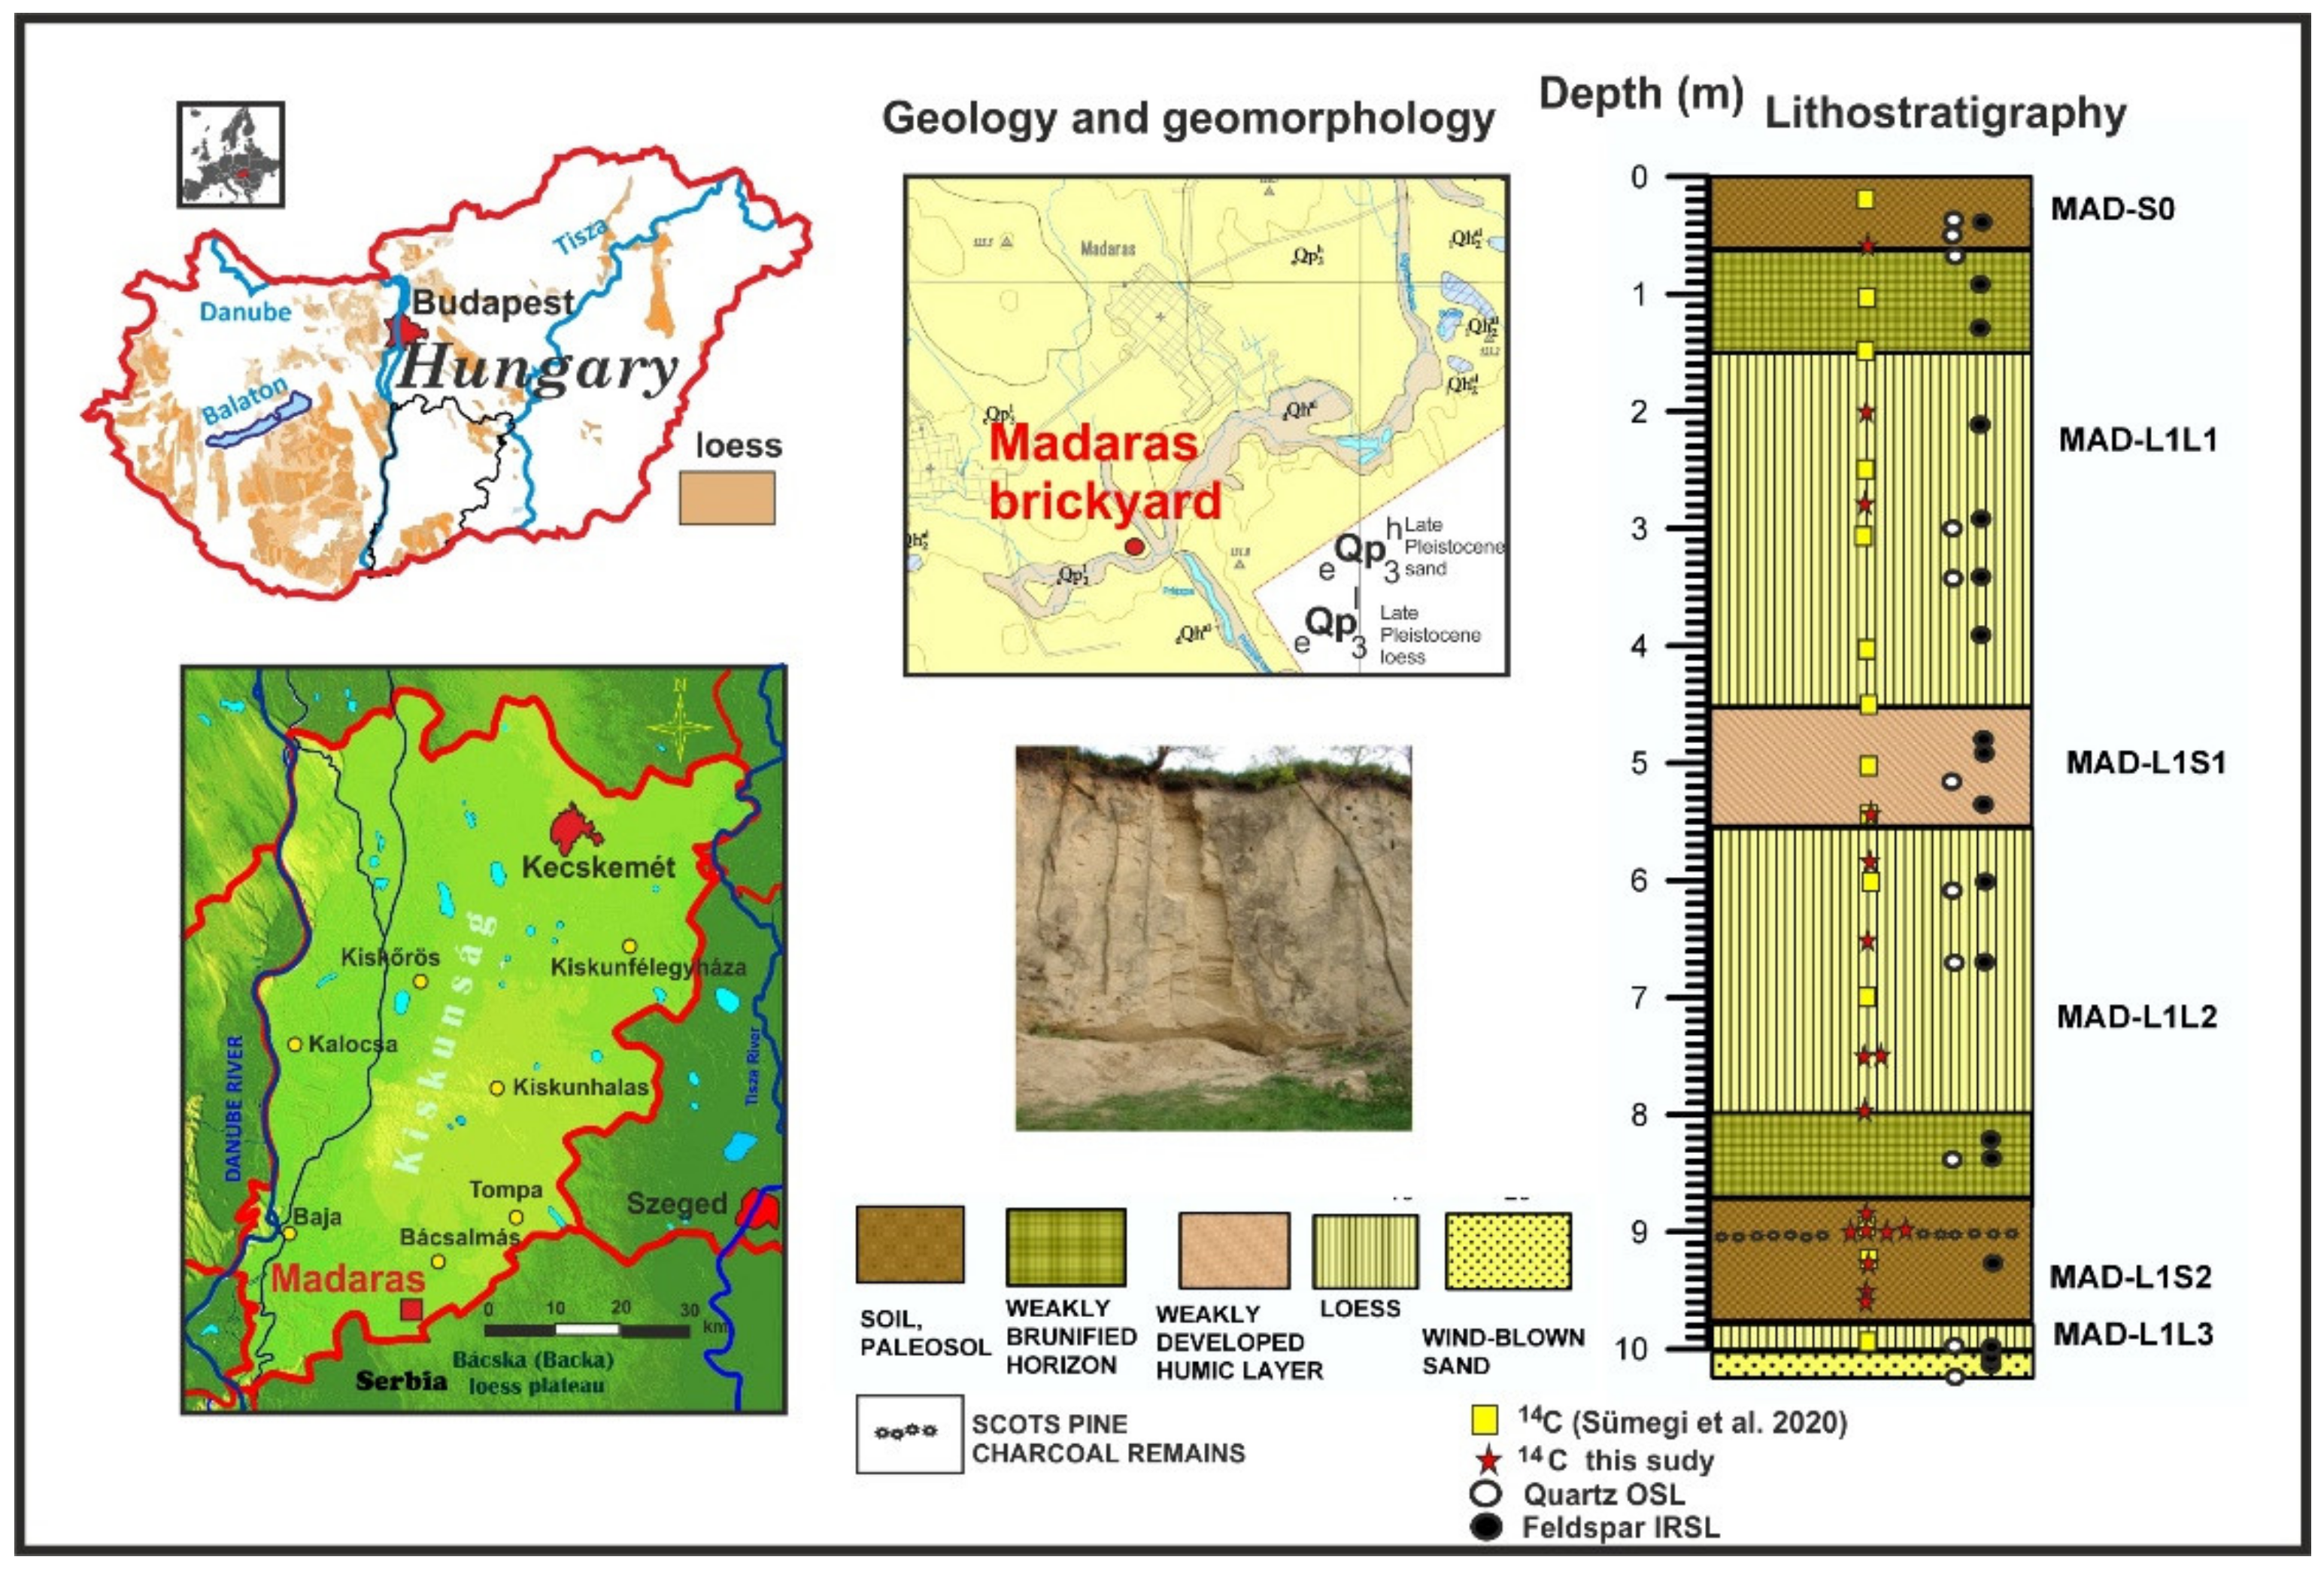 Quaternary | Free Full-Text | Comparison of High-Resolution 14C and  Luminescence-Based Chronologies of the MIS 2 Madaras Loess/Paleosol  Sequence, Hungary: Implications for Chronological Studies